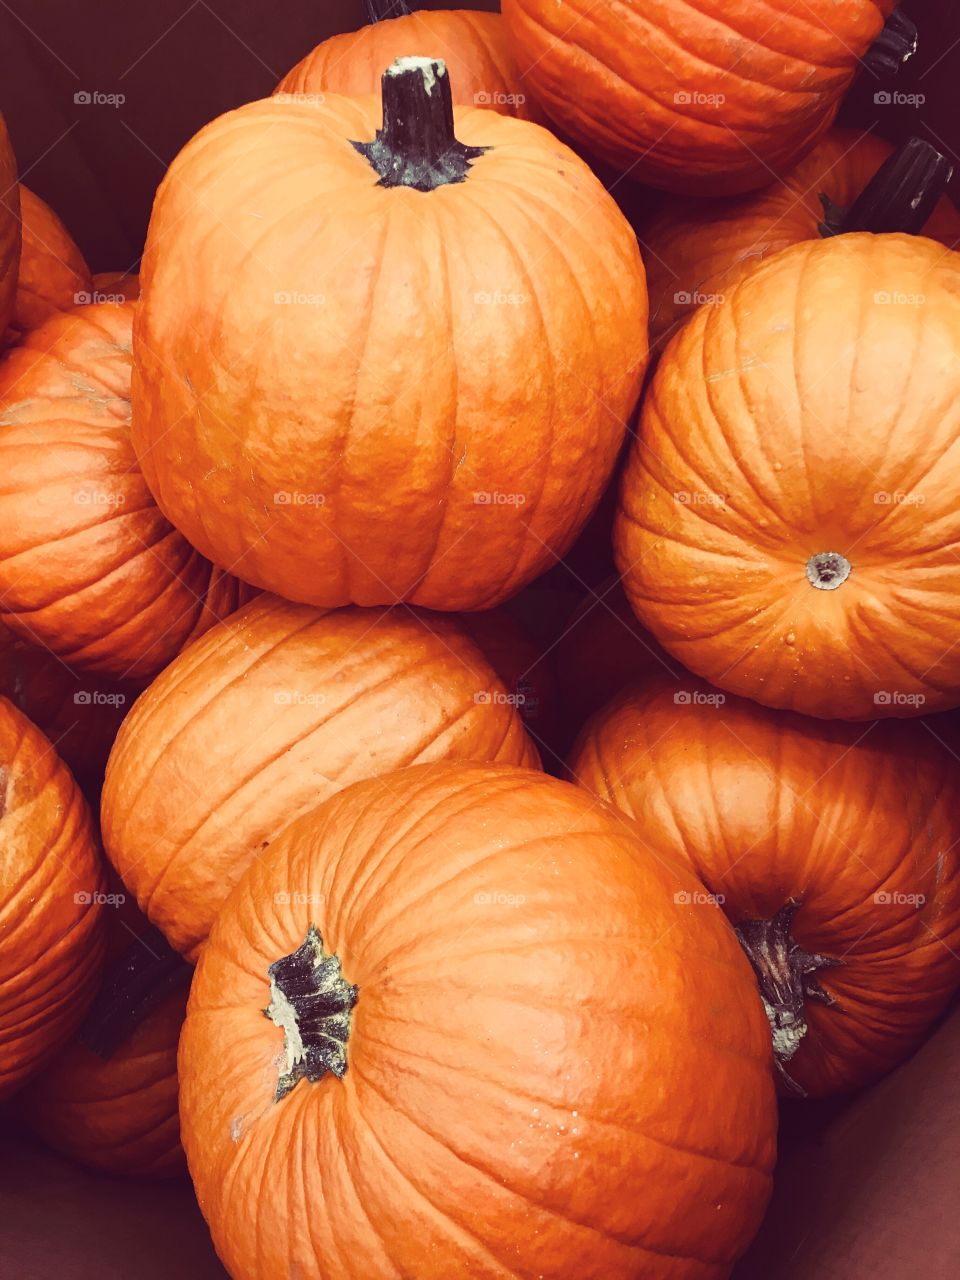 Beautiful bright bold display of large orange pumpkins in a box getting ready for the fall holiday season-Halloween, thanksgiving 